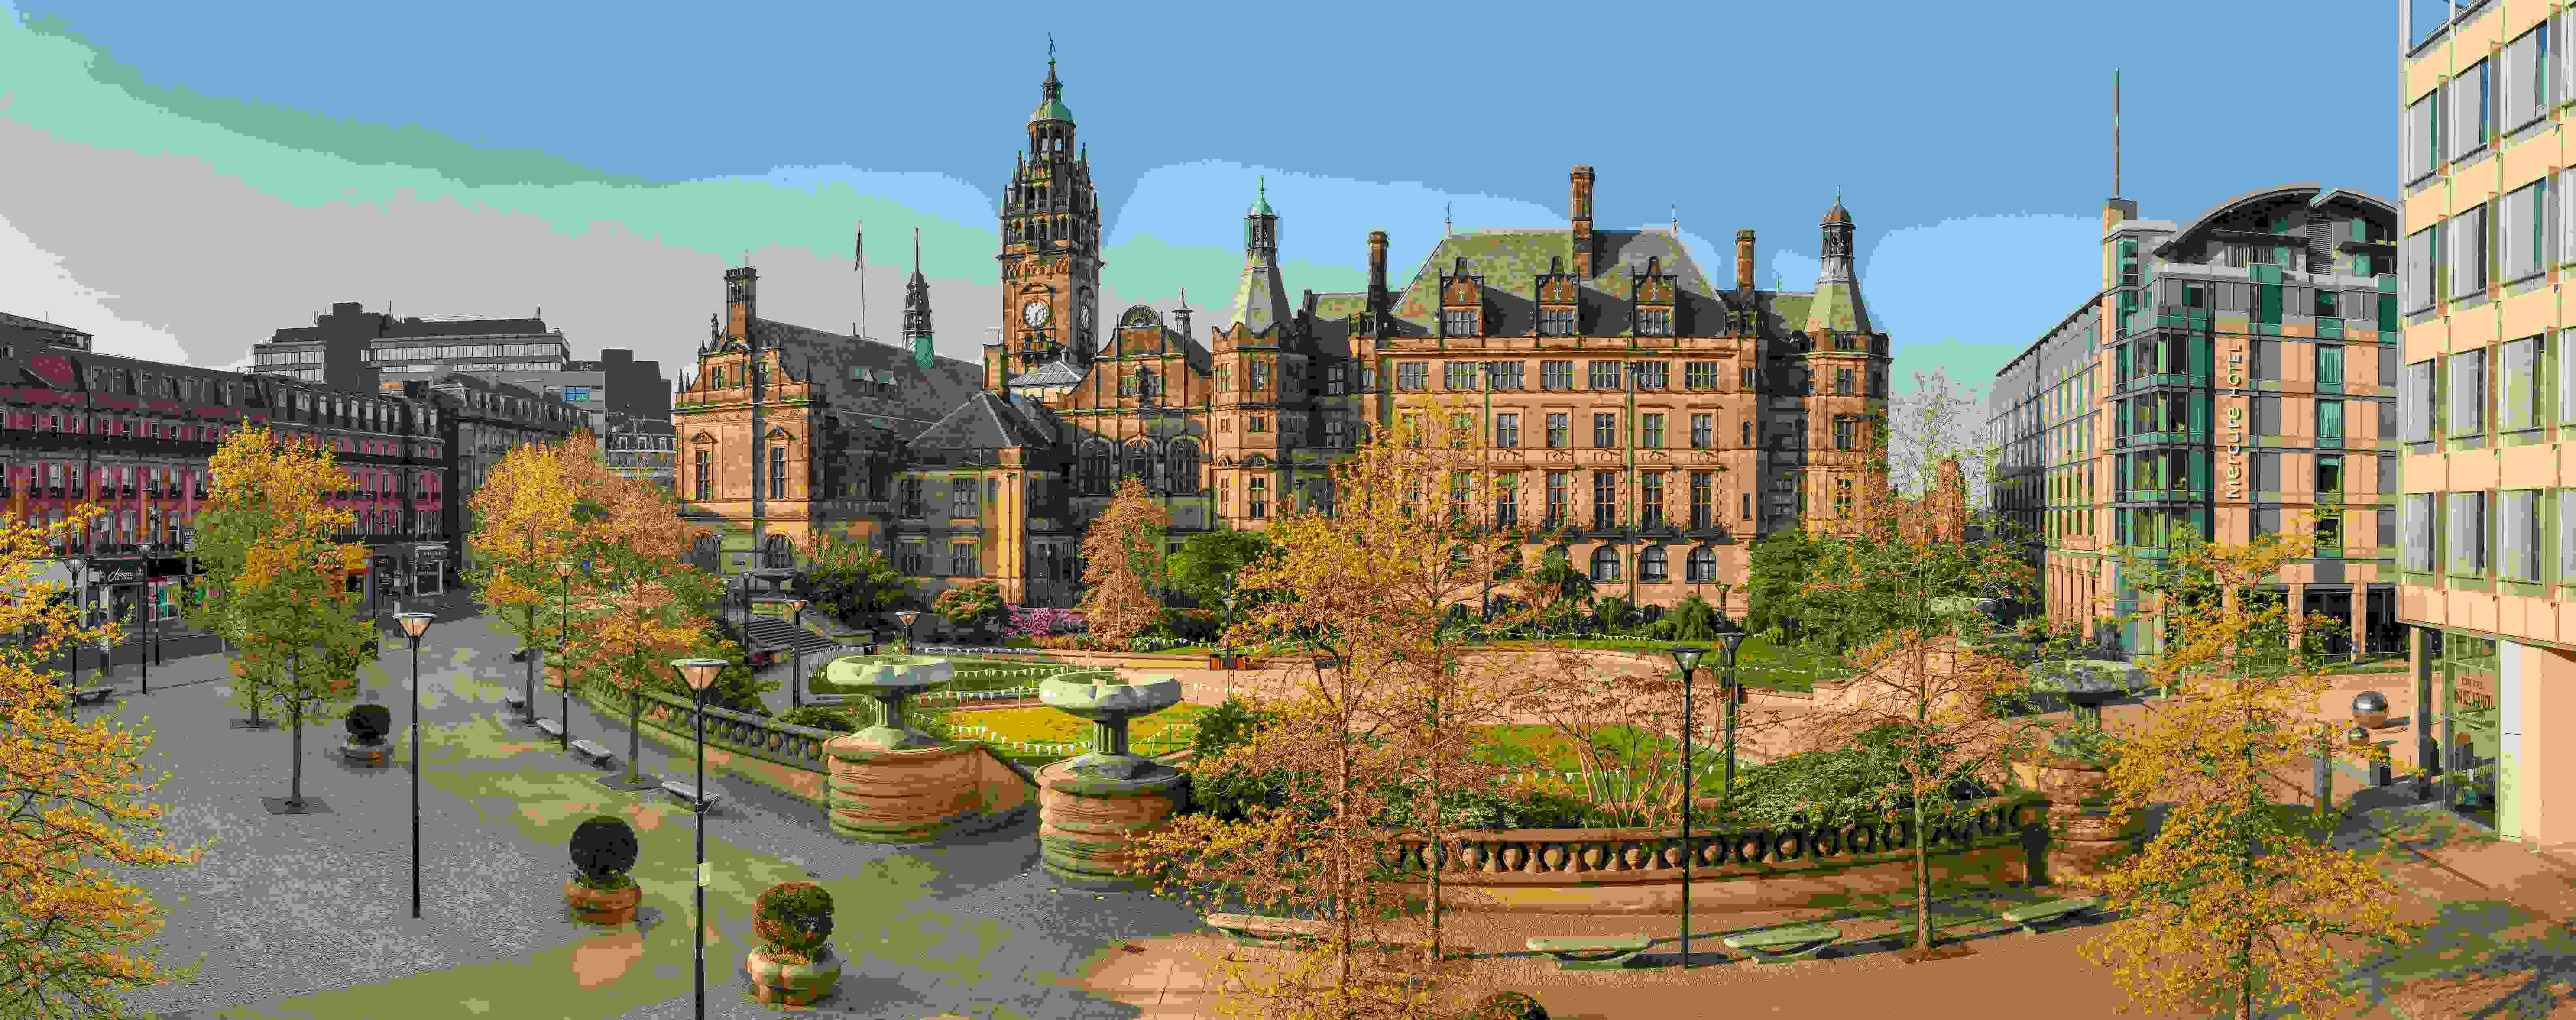 A panoramic picture of the Sheffield Town Hall and Peace Gardens at dusk